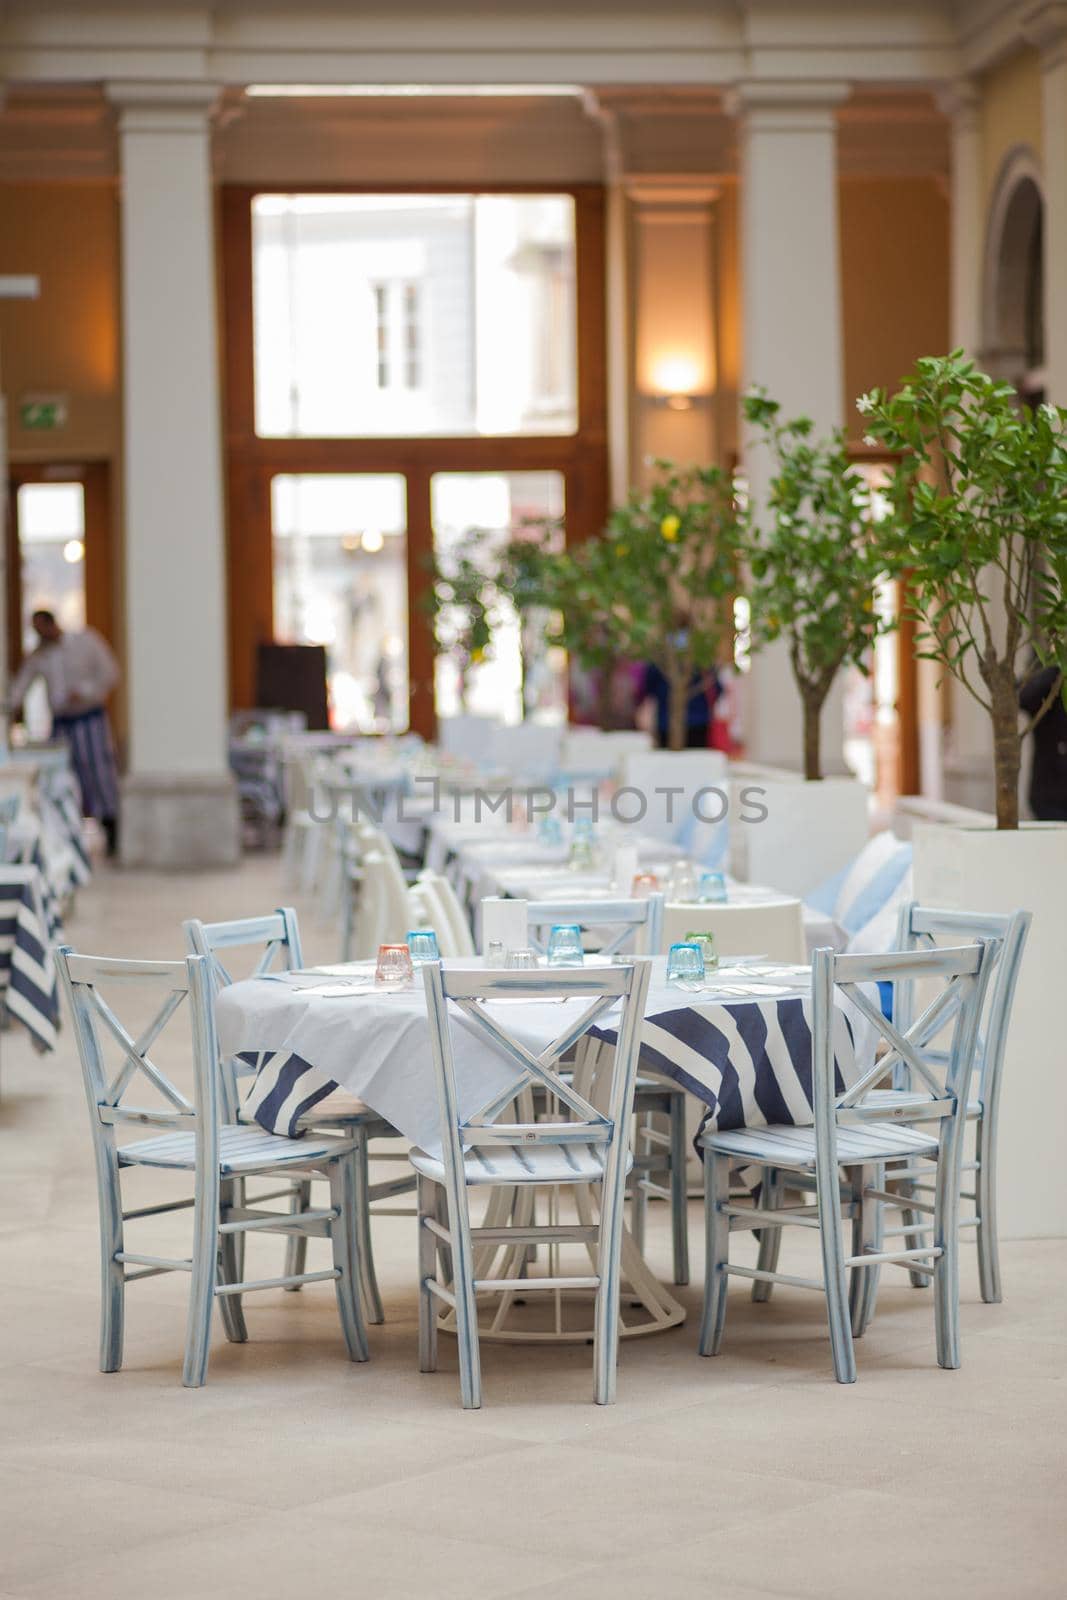 View of the Italian restaurant table set